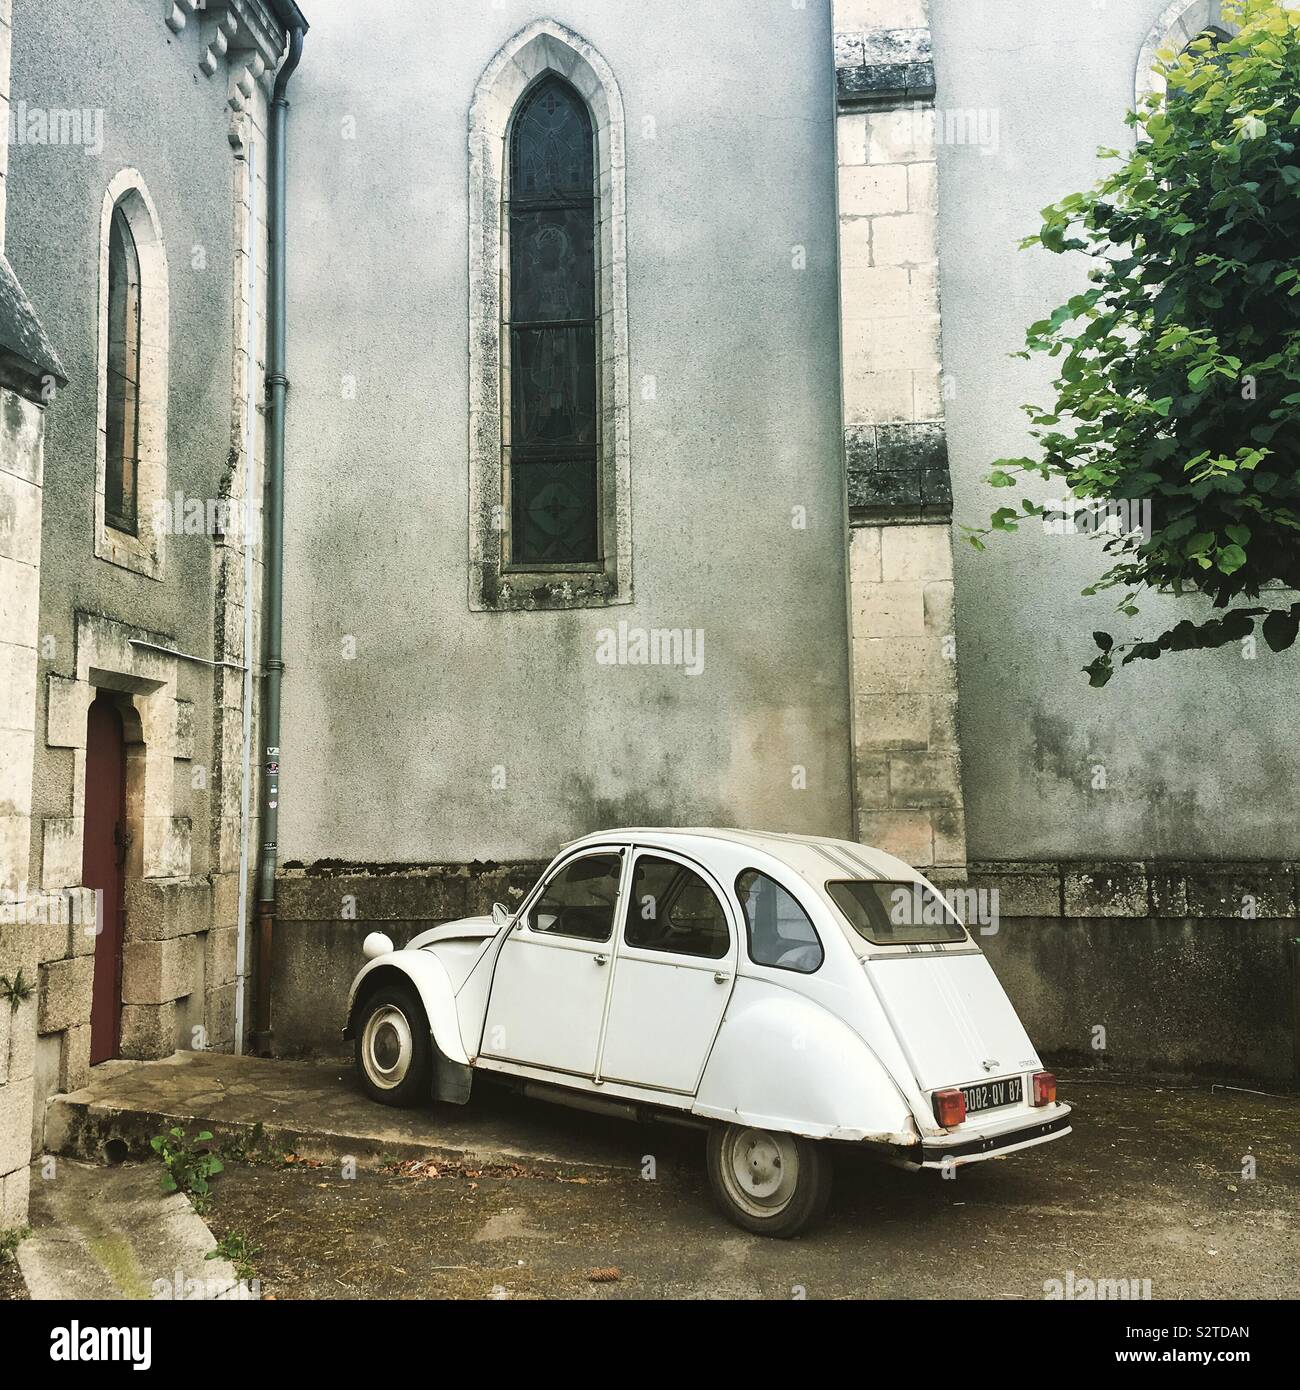 An old white “deux chevaux” car parked in front of a church in a French village Stock Photo